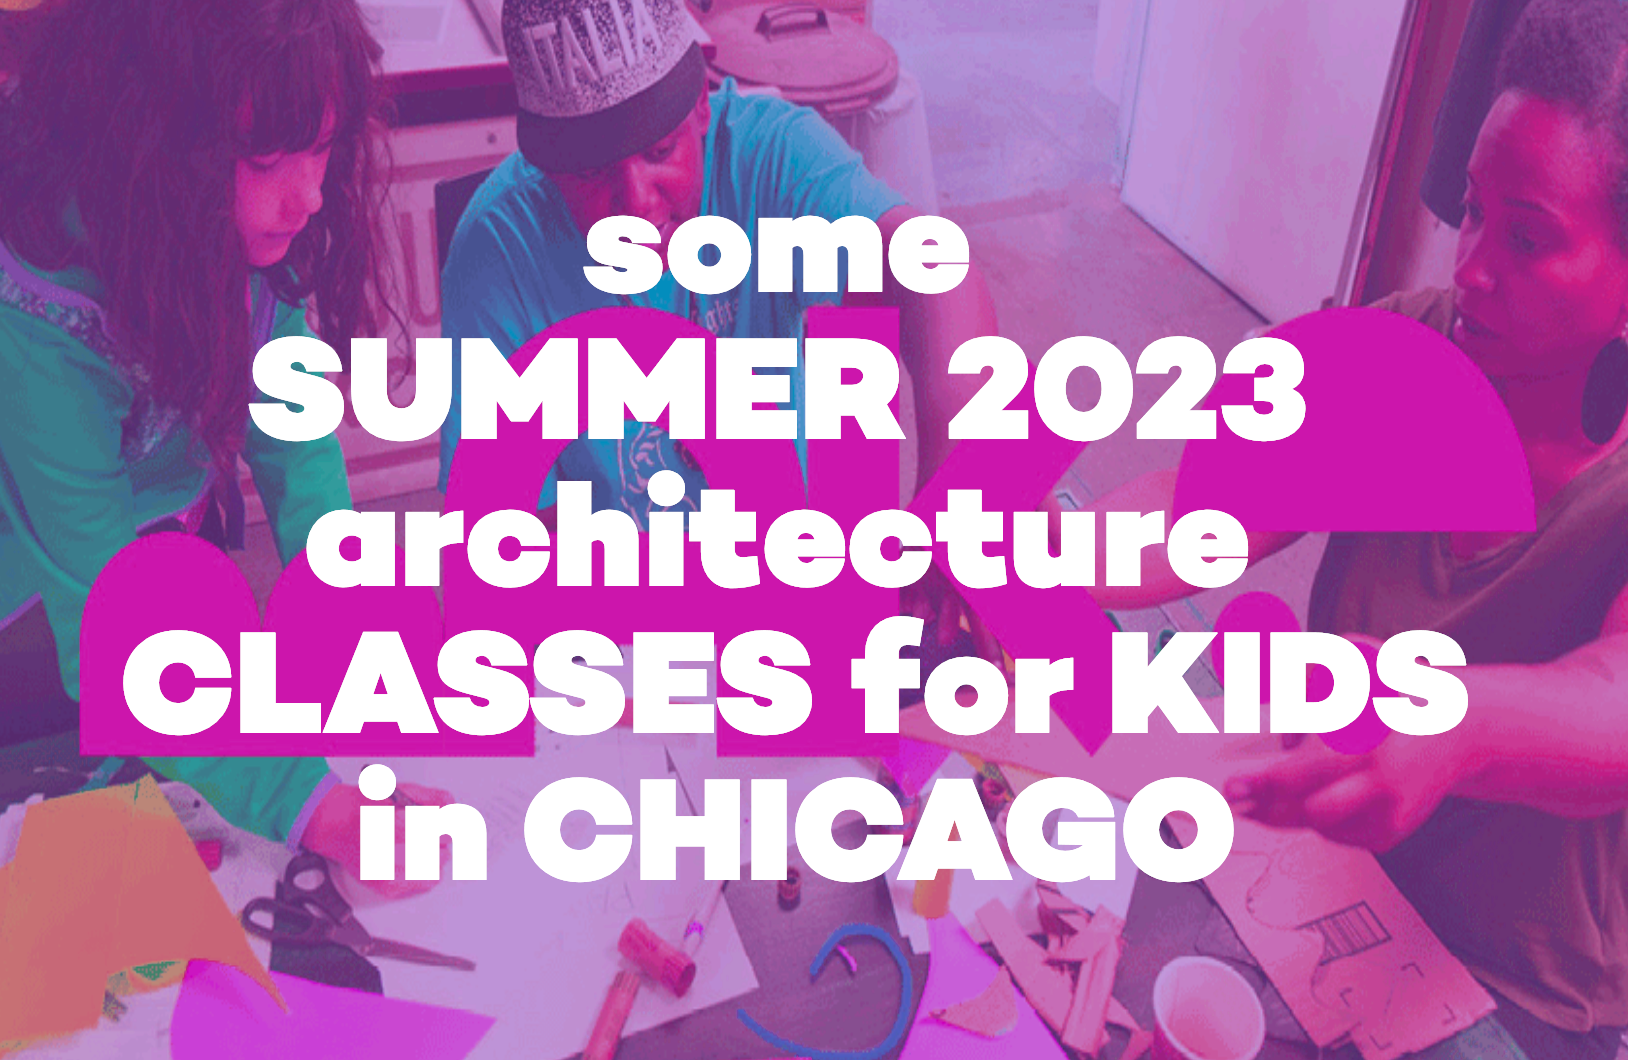 2023 summer classes for kids about architecture in CHICAGO